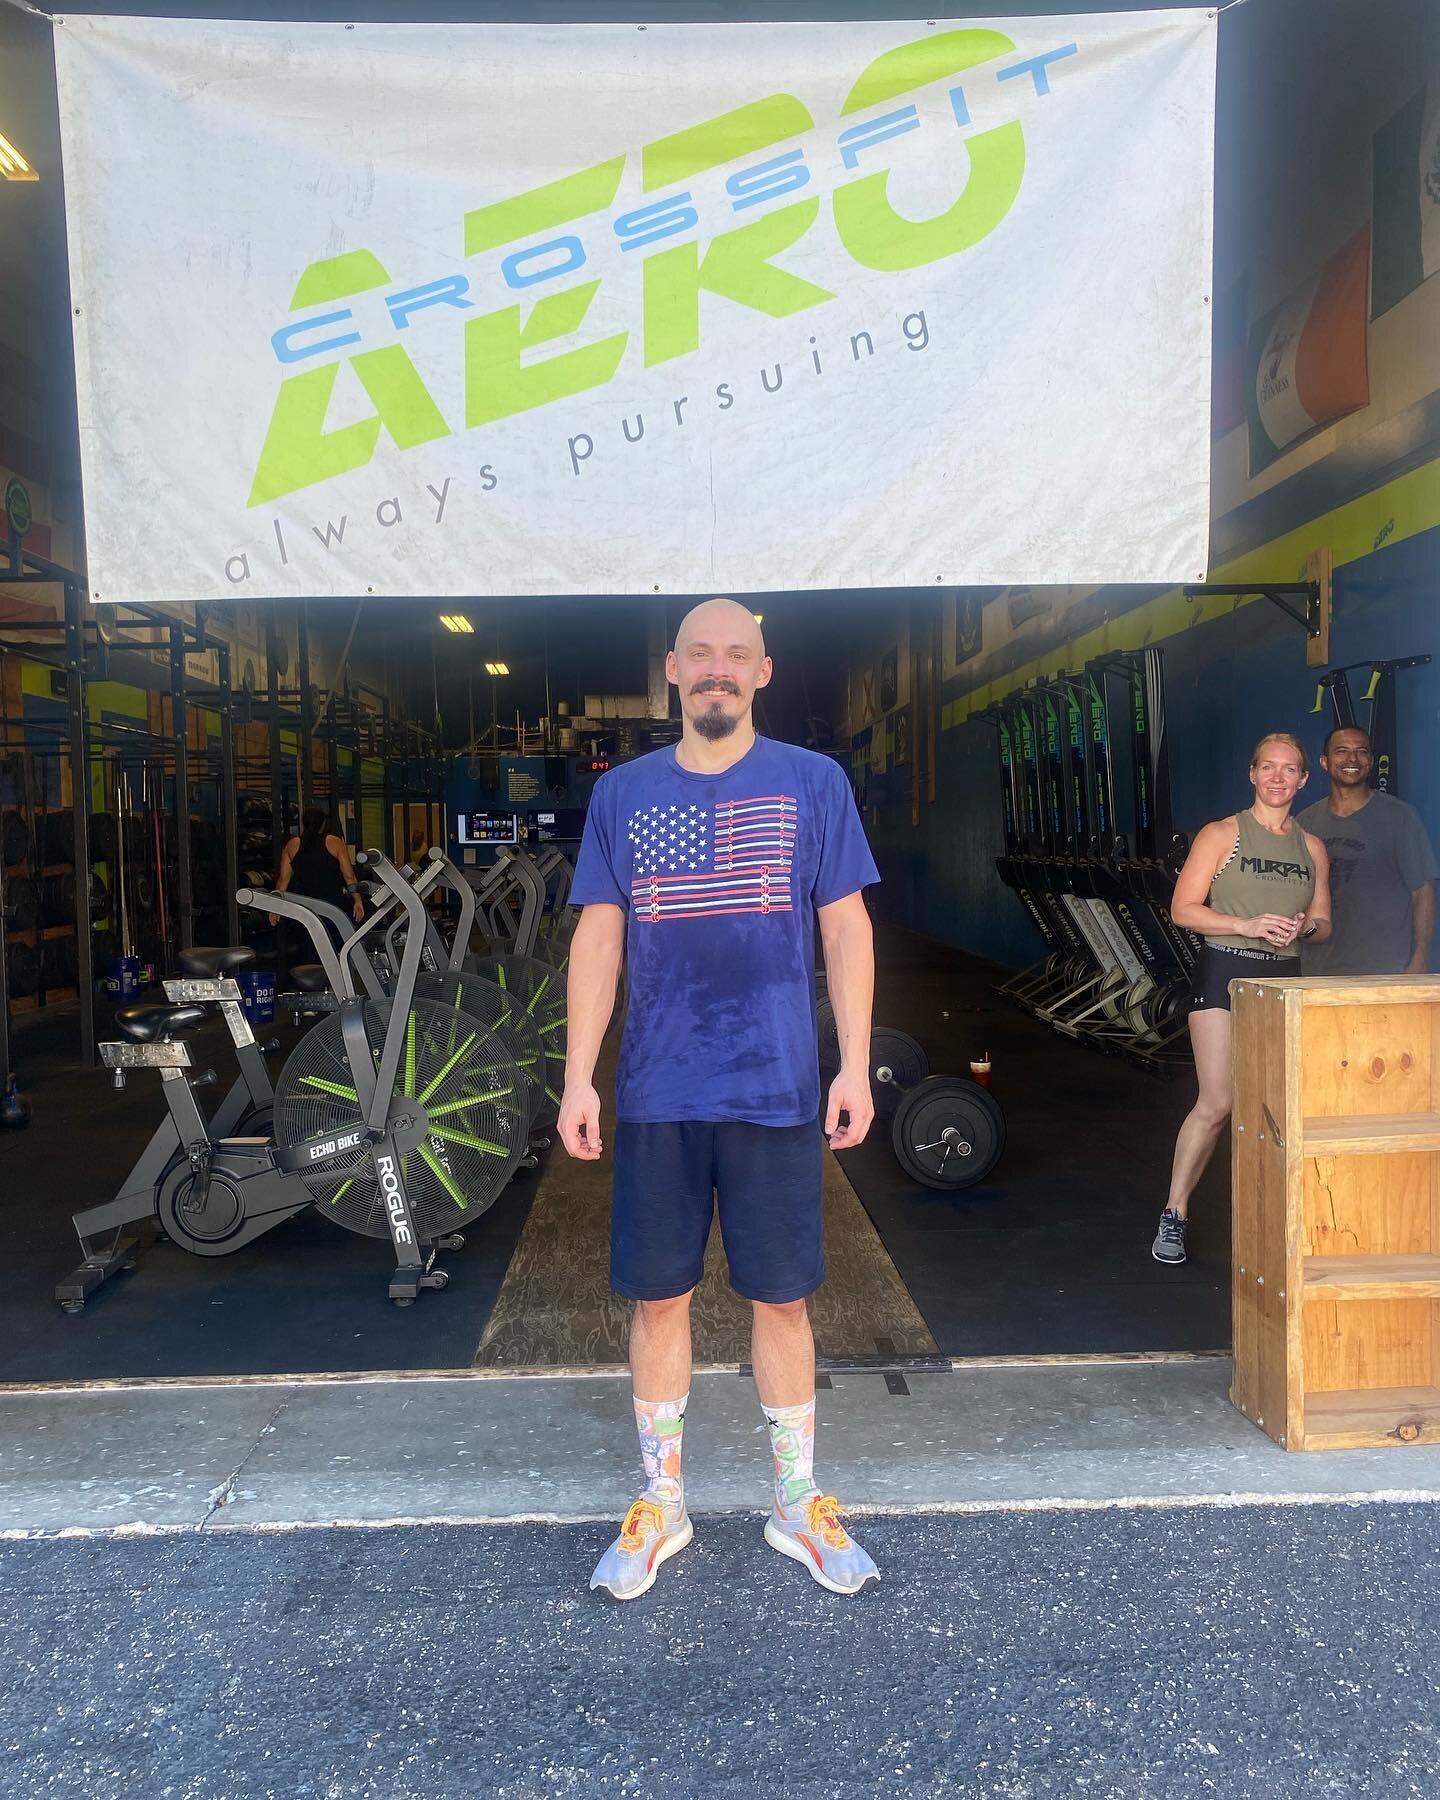 We are honored to announce Crossfit Aero's April Athlete of the Month, Scott Lux!! Where to start.. he has come such a long way since his early days of Aero! We have seen him fight through injuries, represent  Aero tremendously at various competition